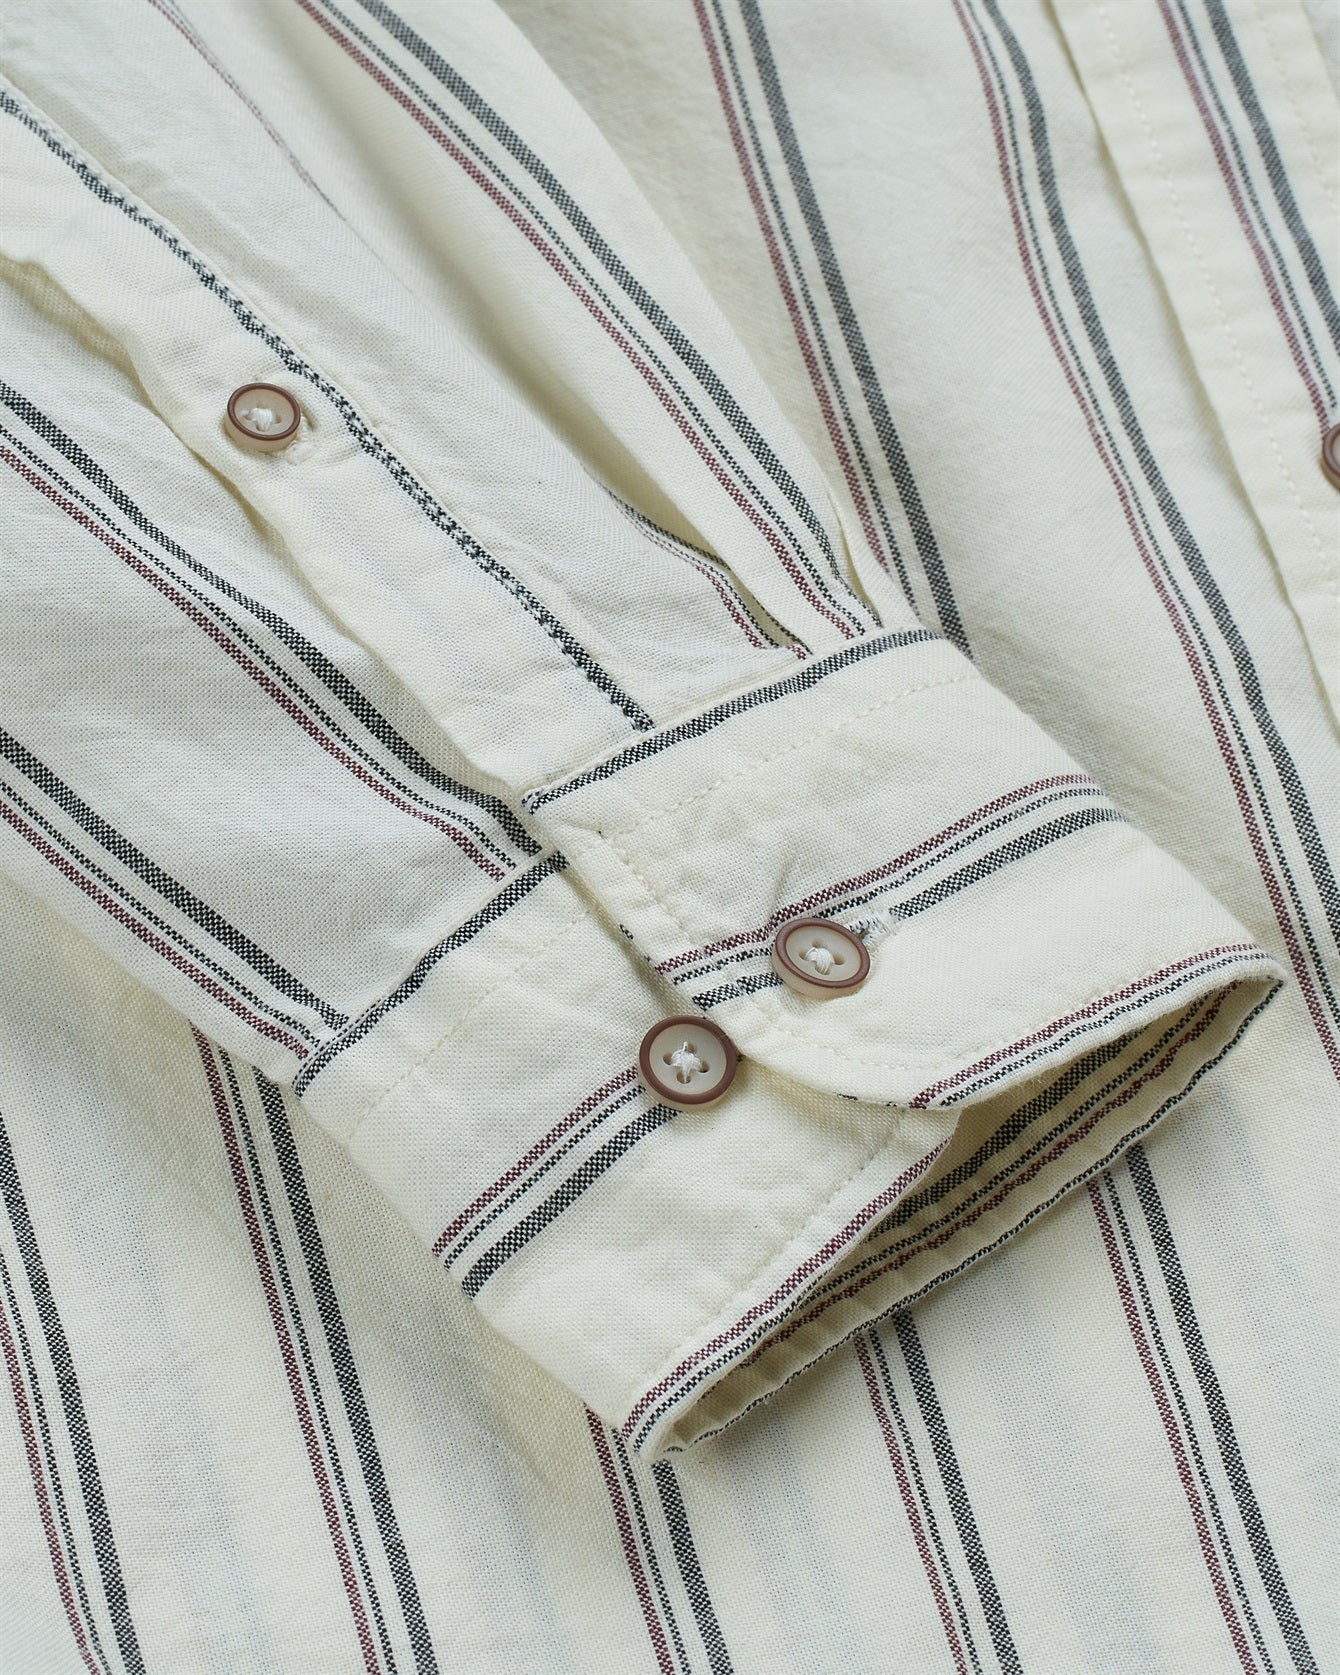 Bare Brown Mandarin Collar Stripped Cotton Shirt, Slim Fit with Full Sleeves - Off White